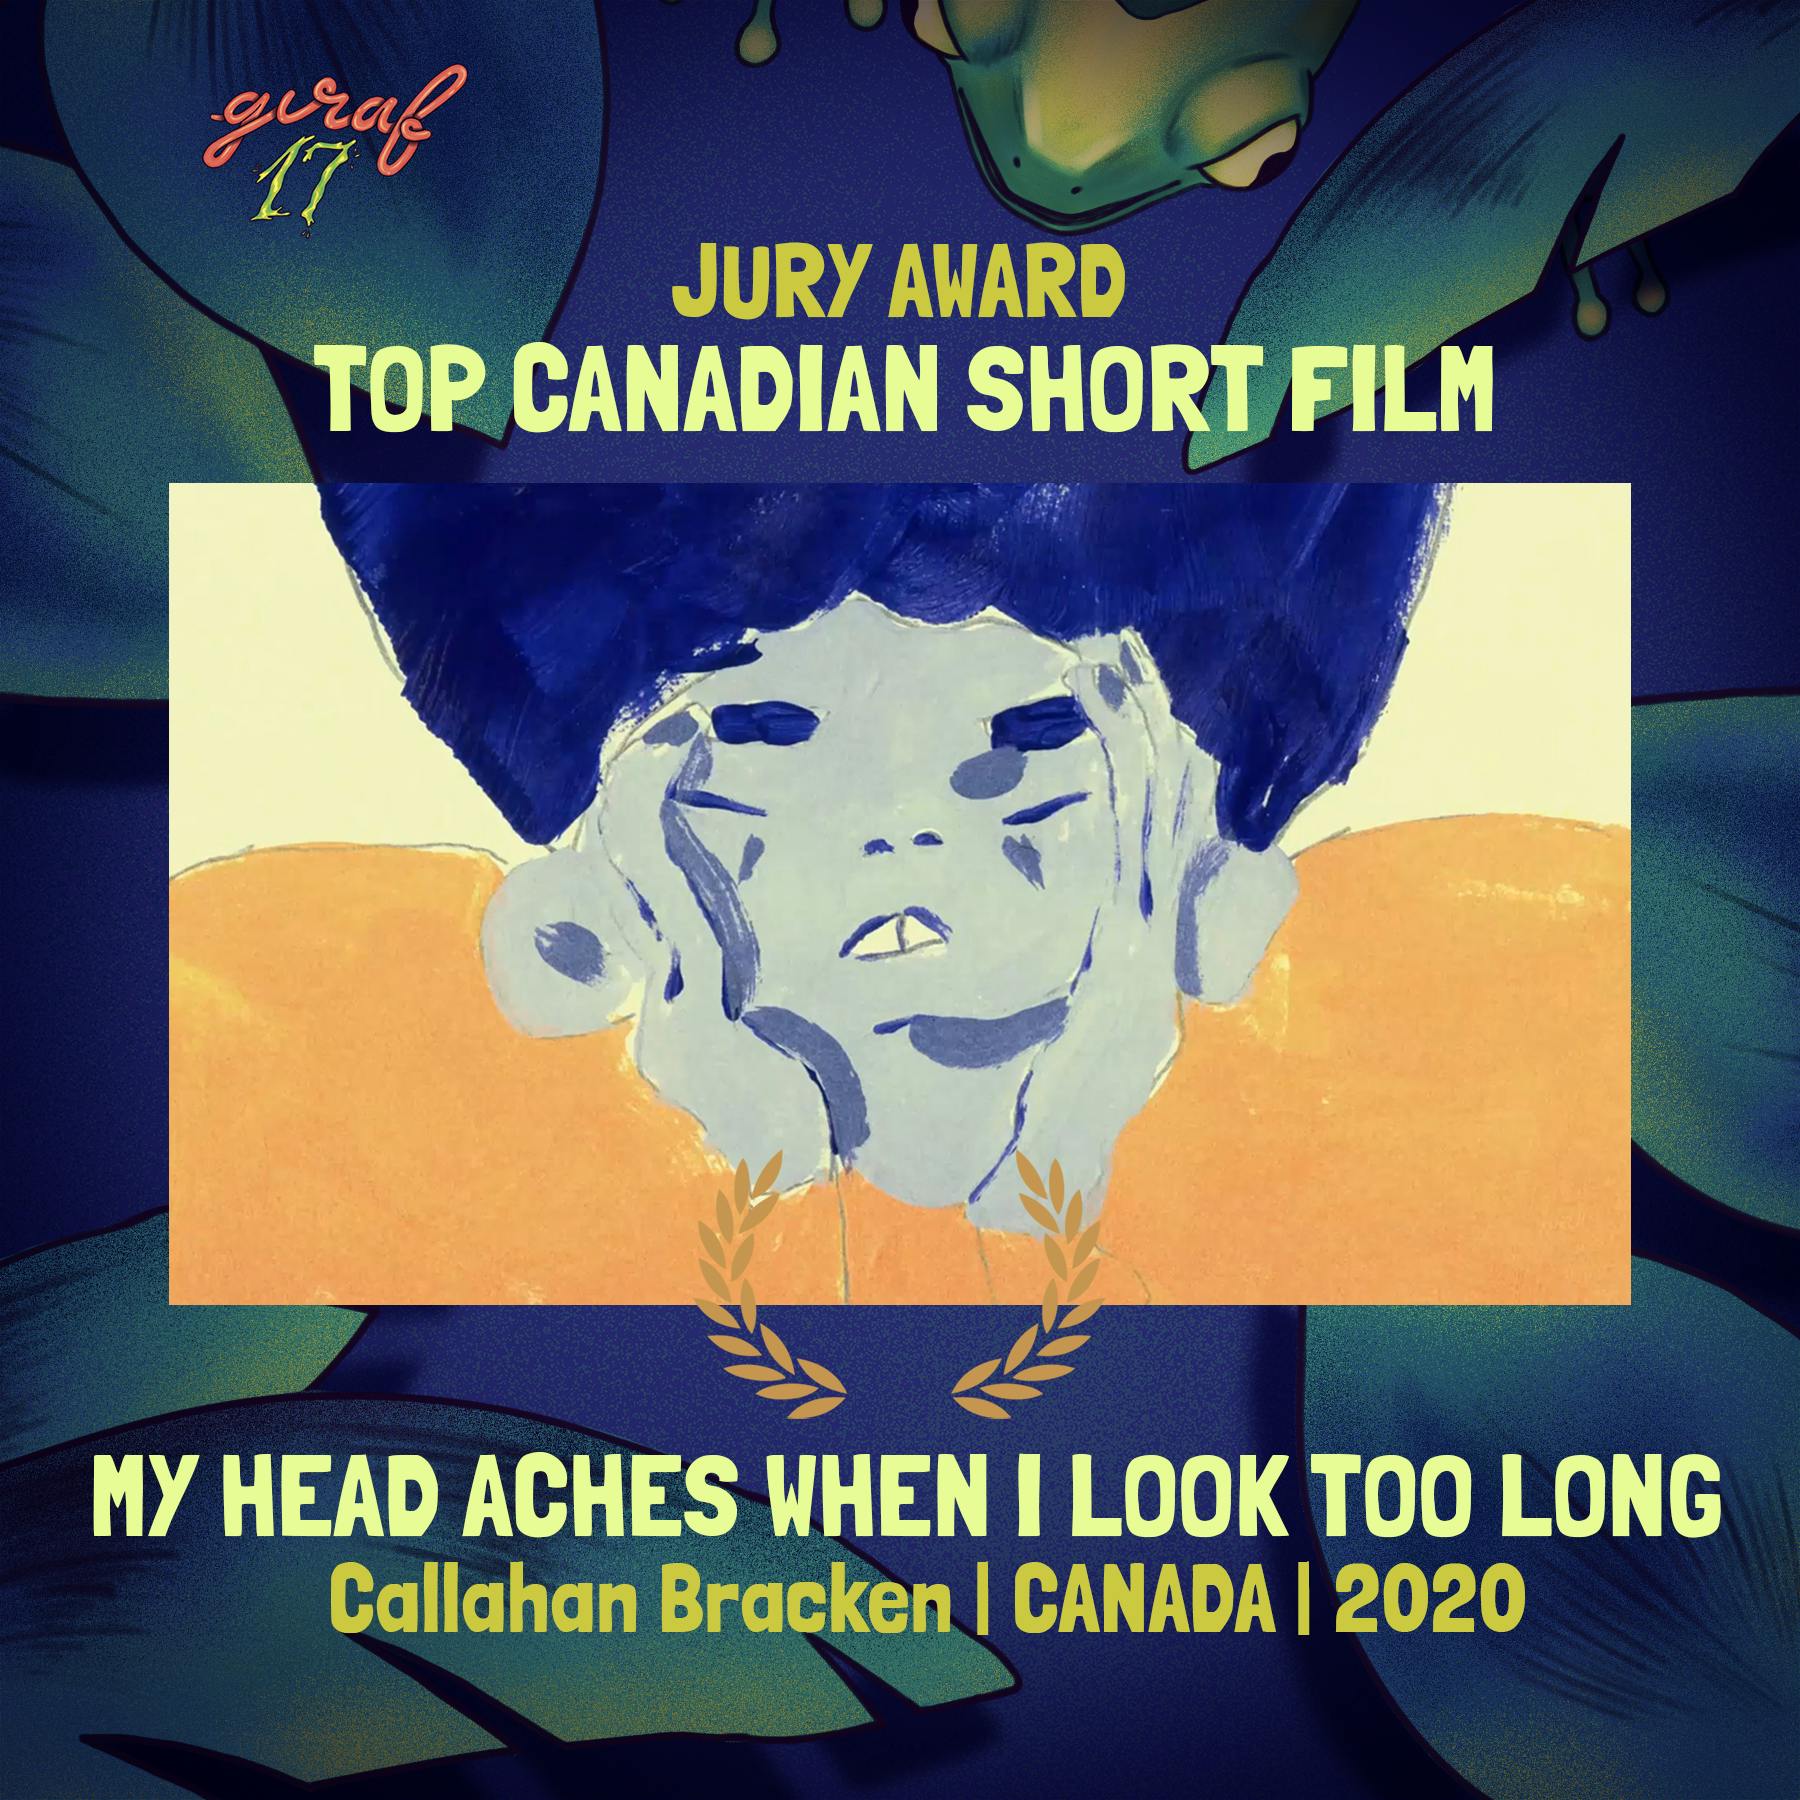 A close-up drawing of a person cradling their head in their hands. Surrounding text: GIRAF 17 Jury Award, Top Canadian Short Film; My Head Aches When I Look Too Long; Callahan Bracken; Canada; 2020